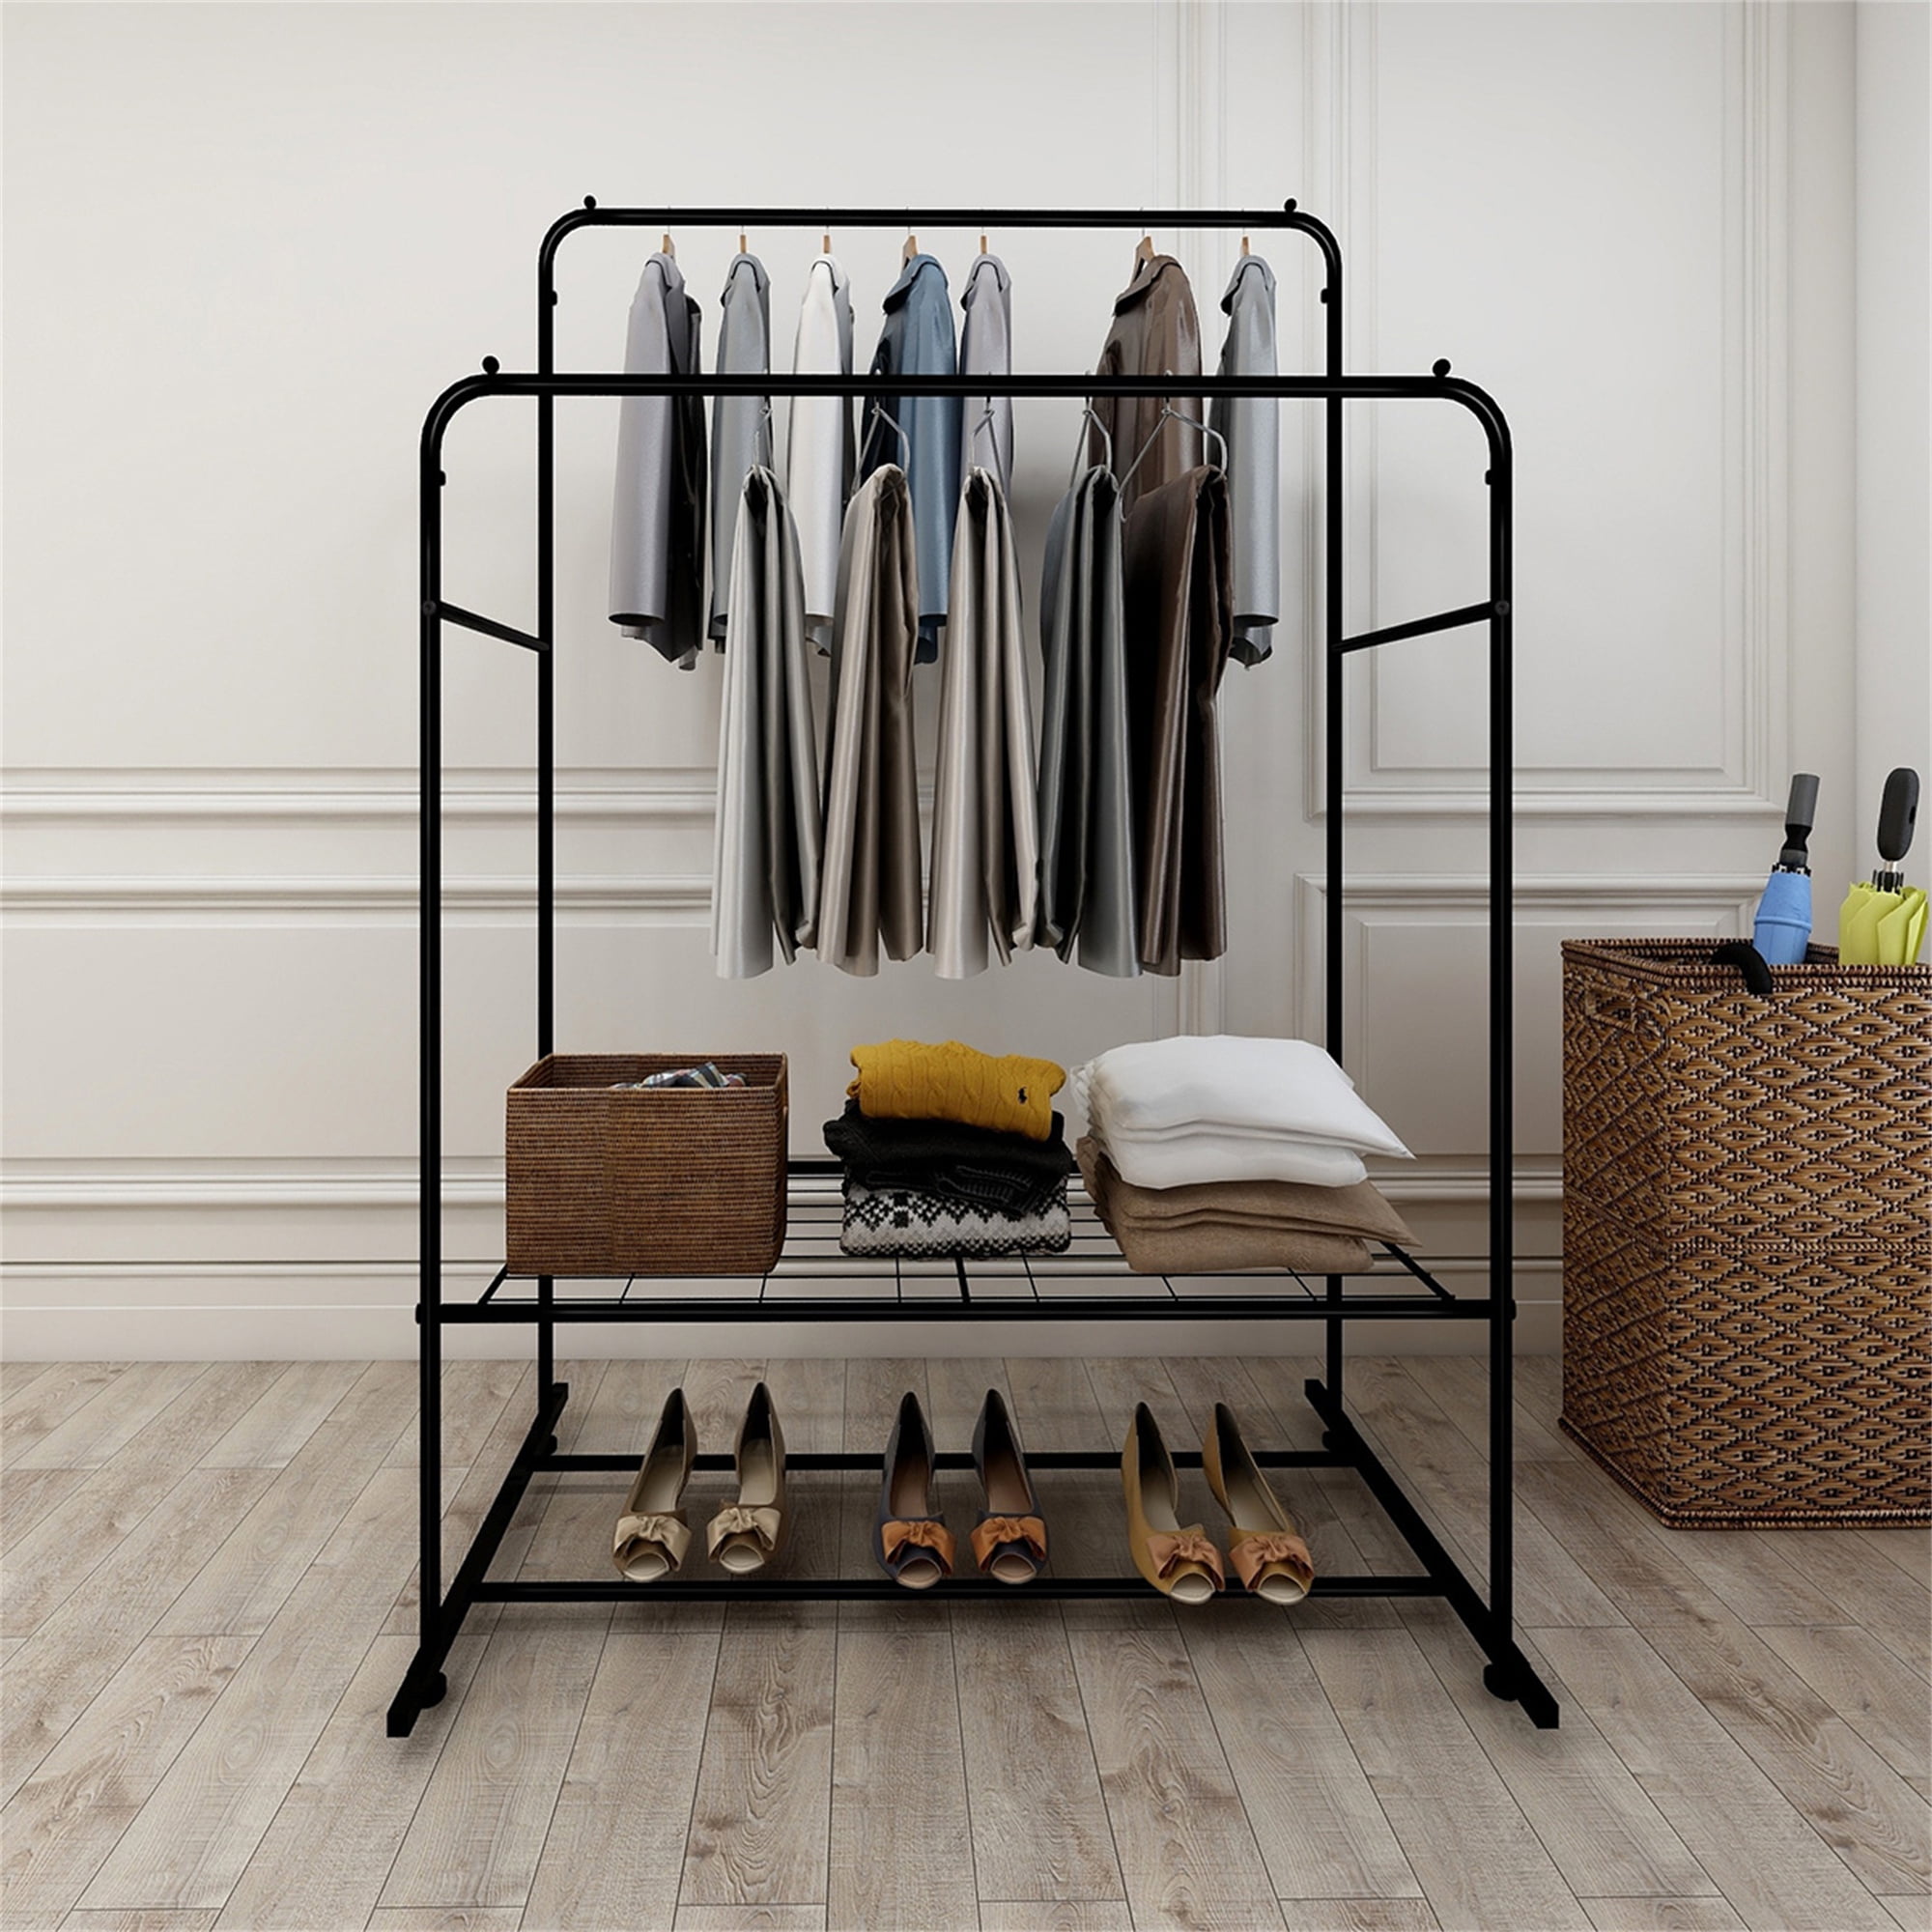 Details about   SALE Clothes Wall Rail Tube Garment Hanging Pipe Walk In Wardrobe 3ft or 1mtr 